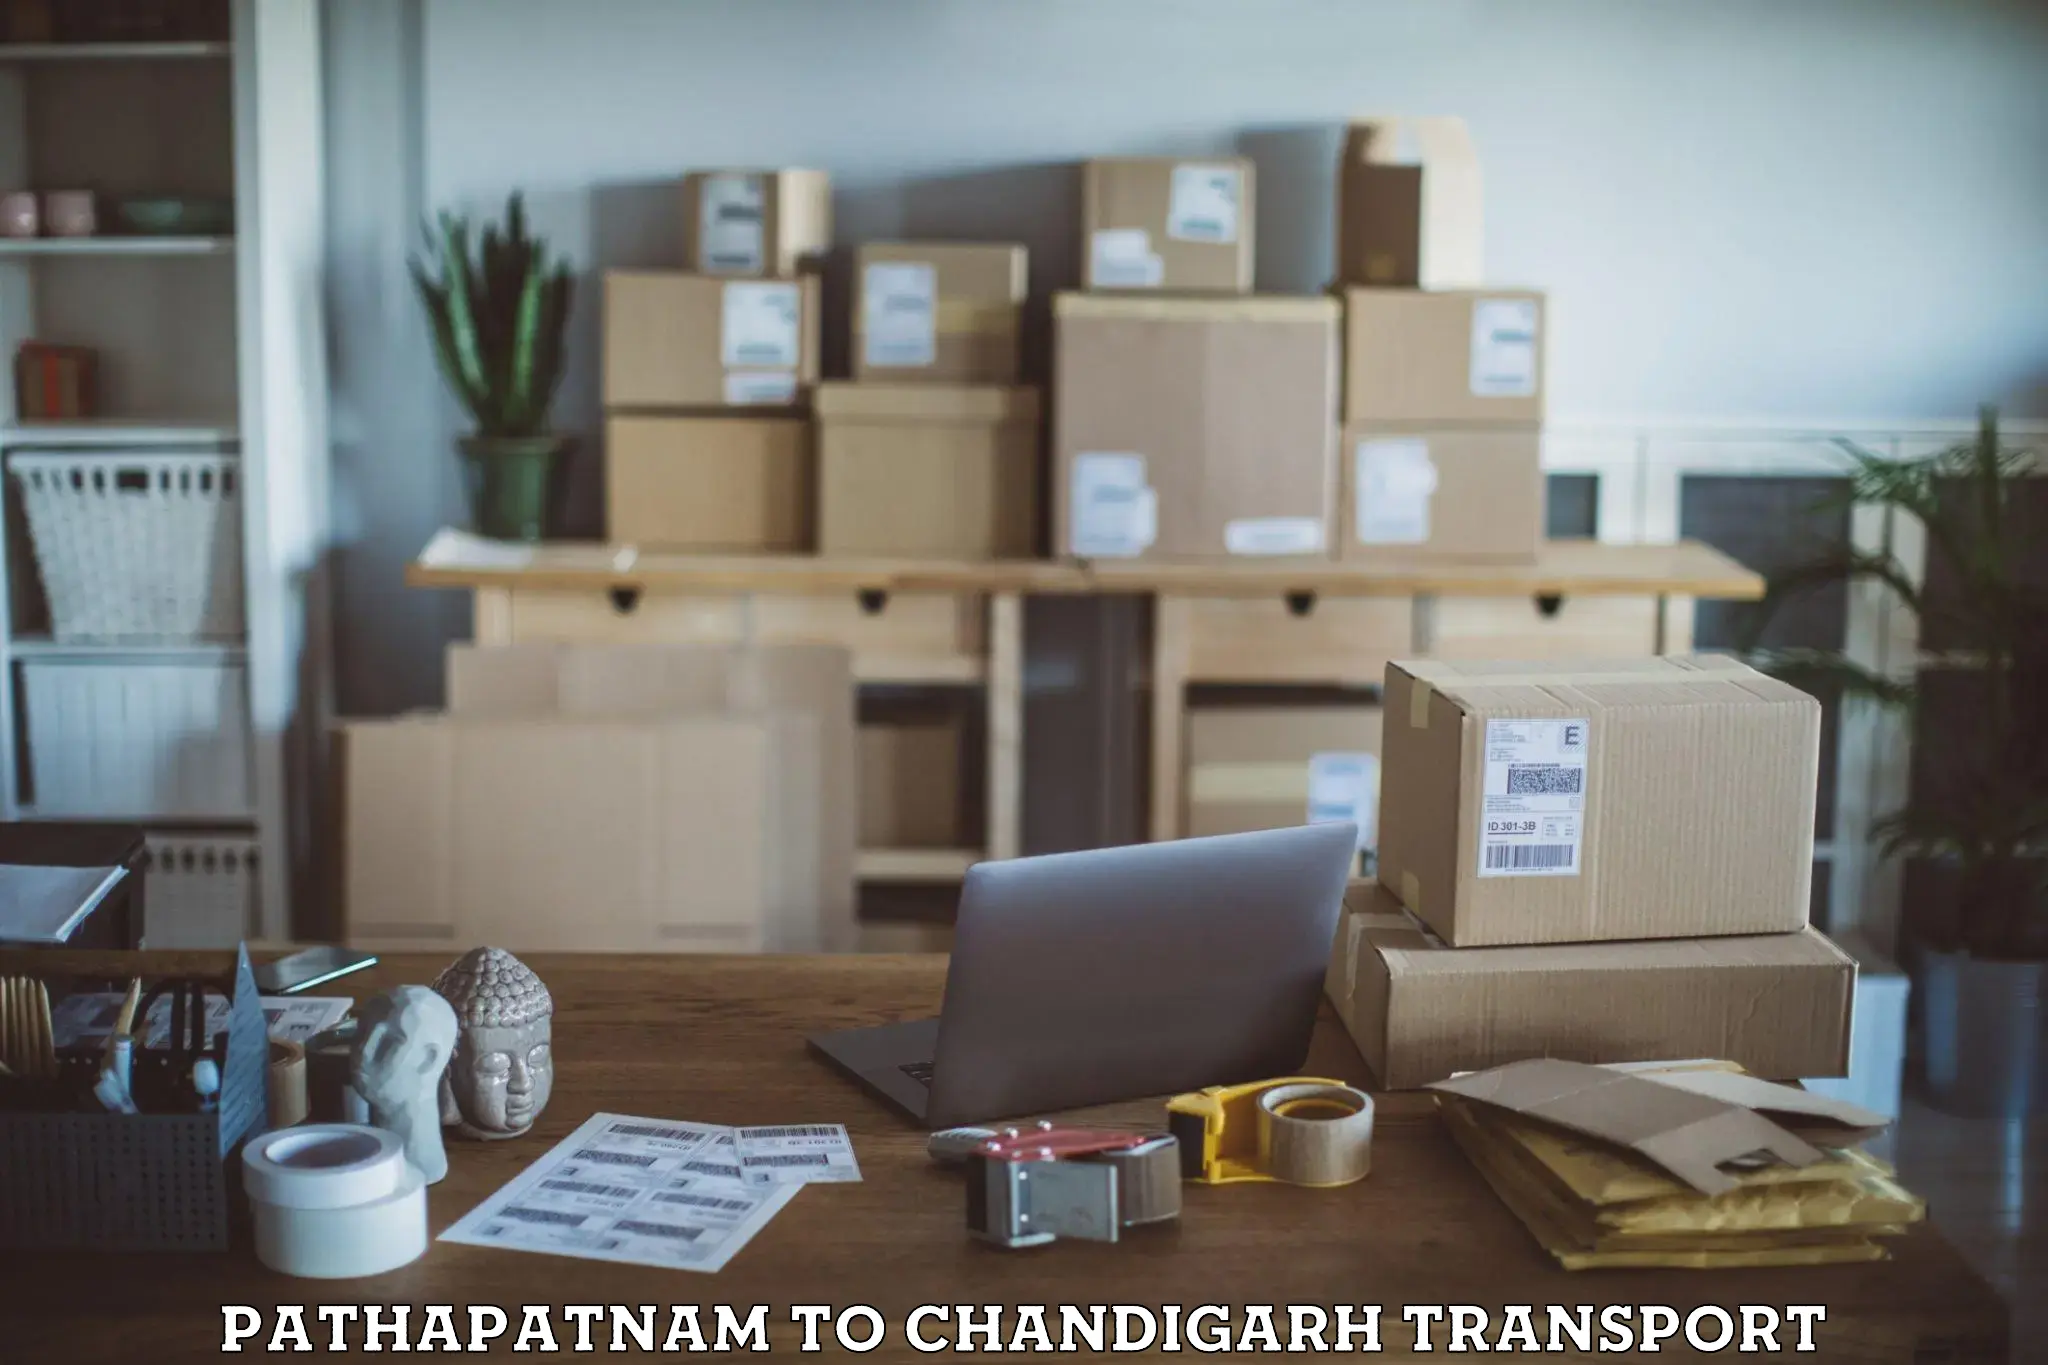 Vehicle transport services Pathapatnam to Chandigarh